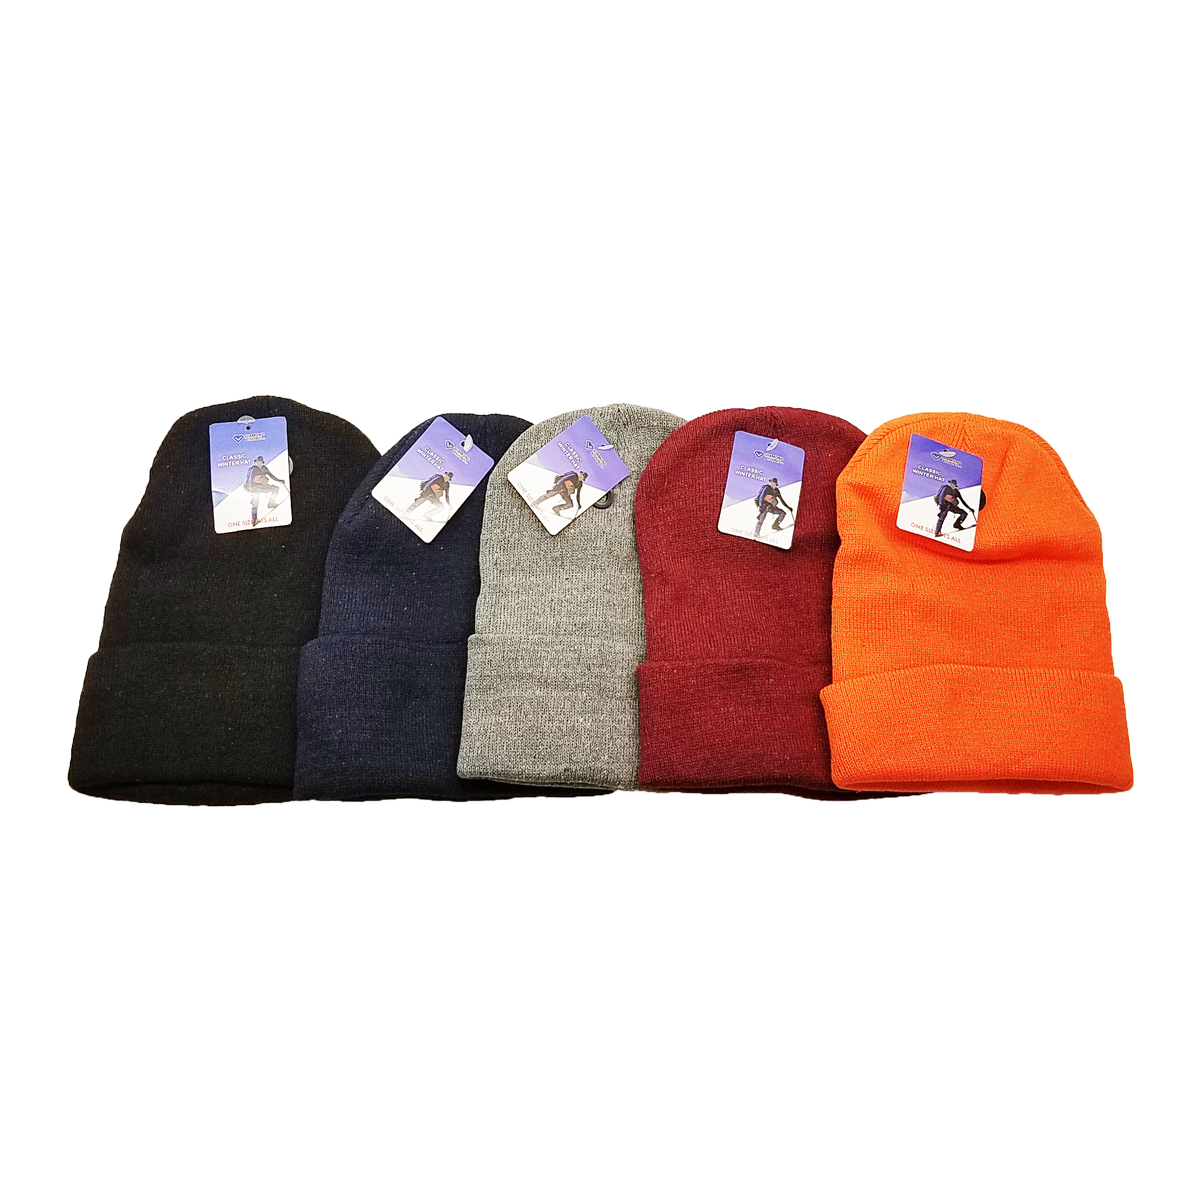 Wholesale Adult Knit Beanies - Cuffed, Assorted Colors